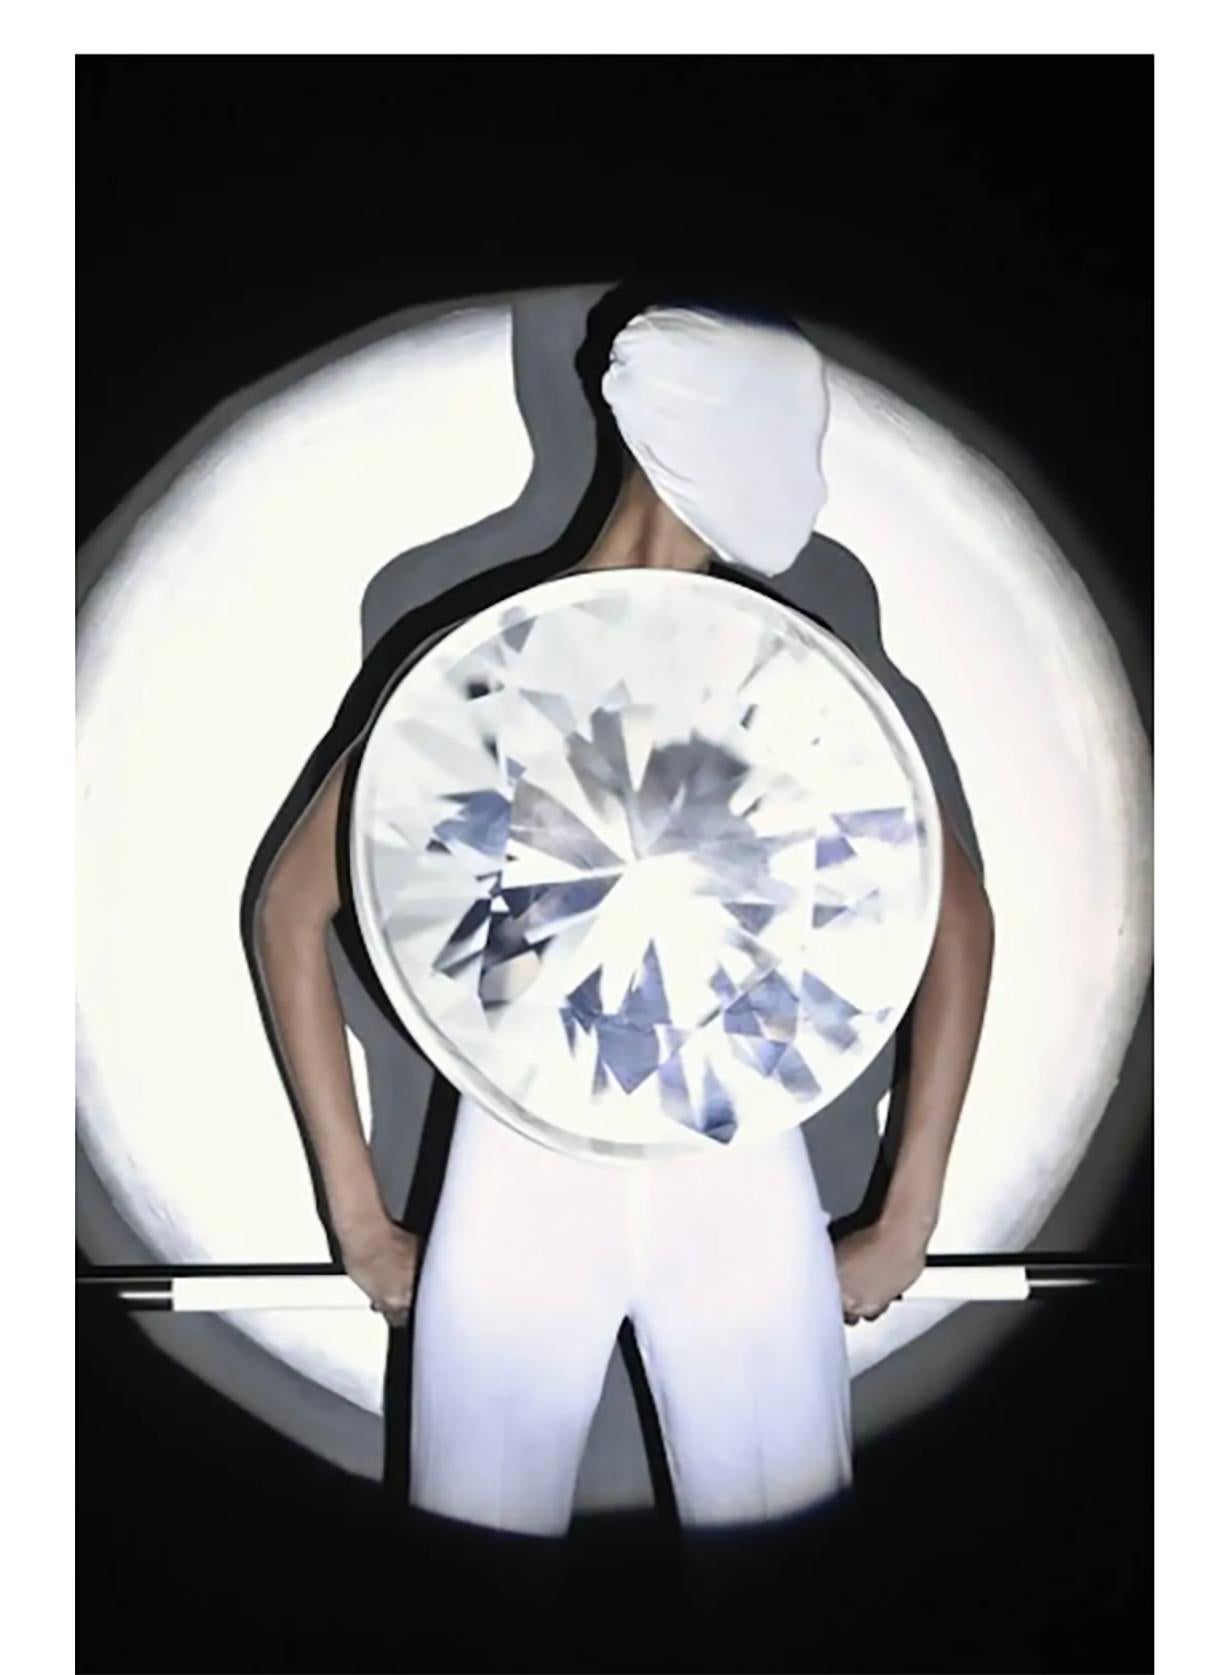 2009 Martin Margiela Artisanal Diamond Top.
Diamond print with elastic band strap 
Spring / Summer 2009 Collection.

One Size

Condition: Excellent
listing for top only. 